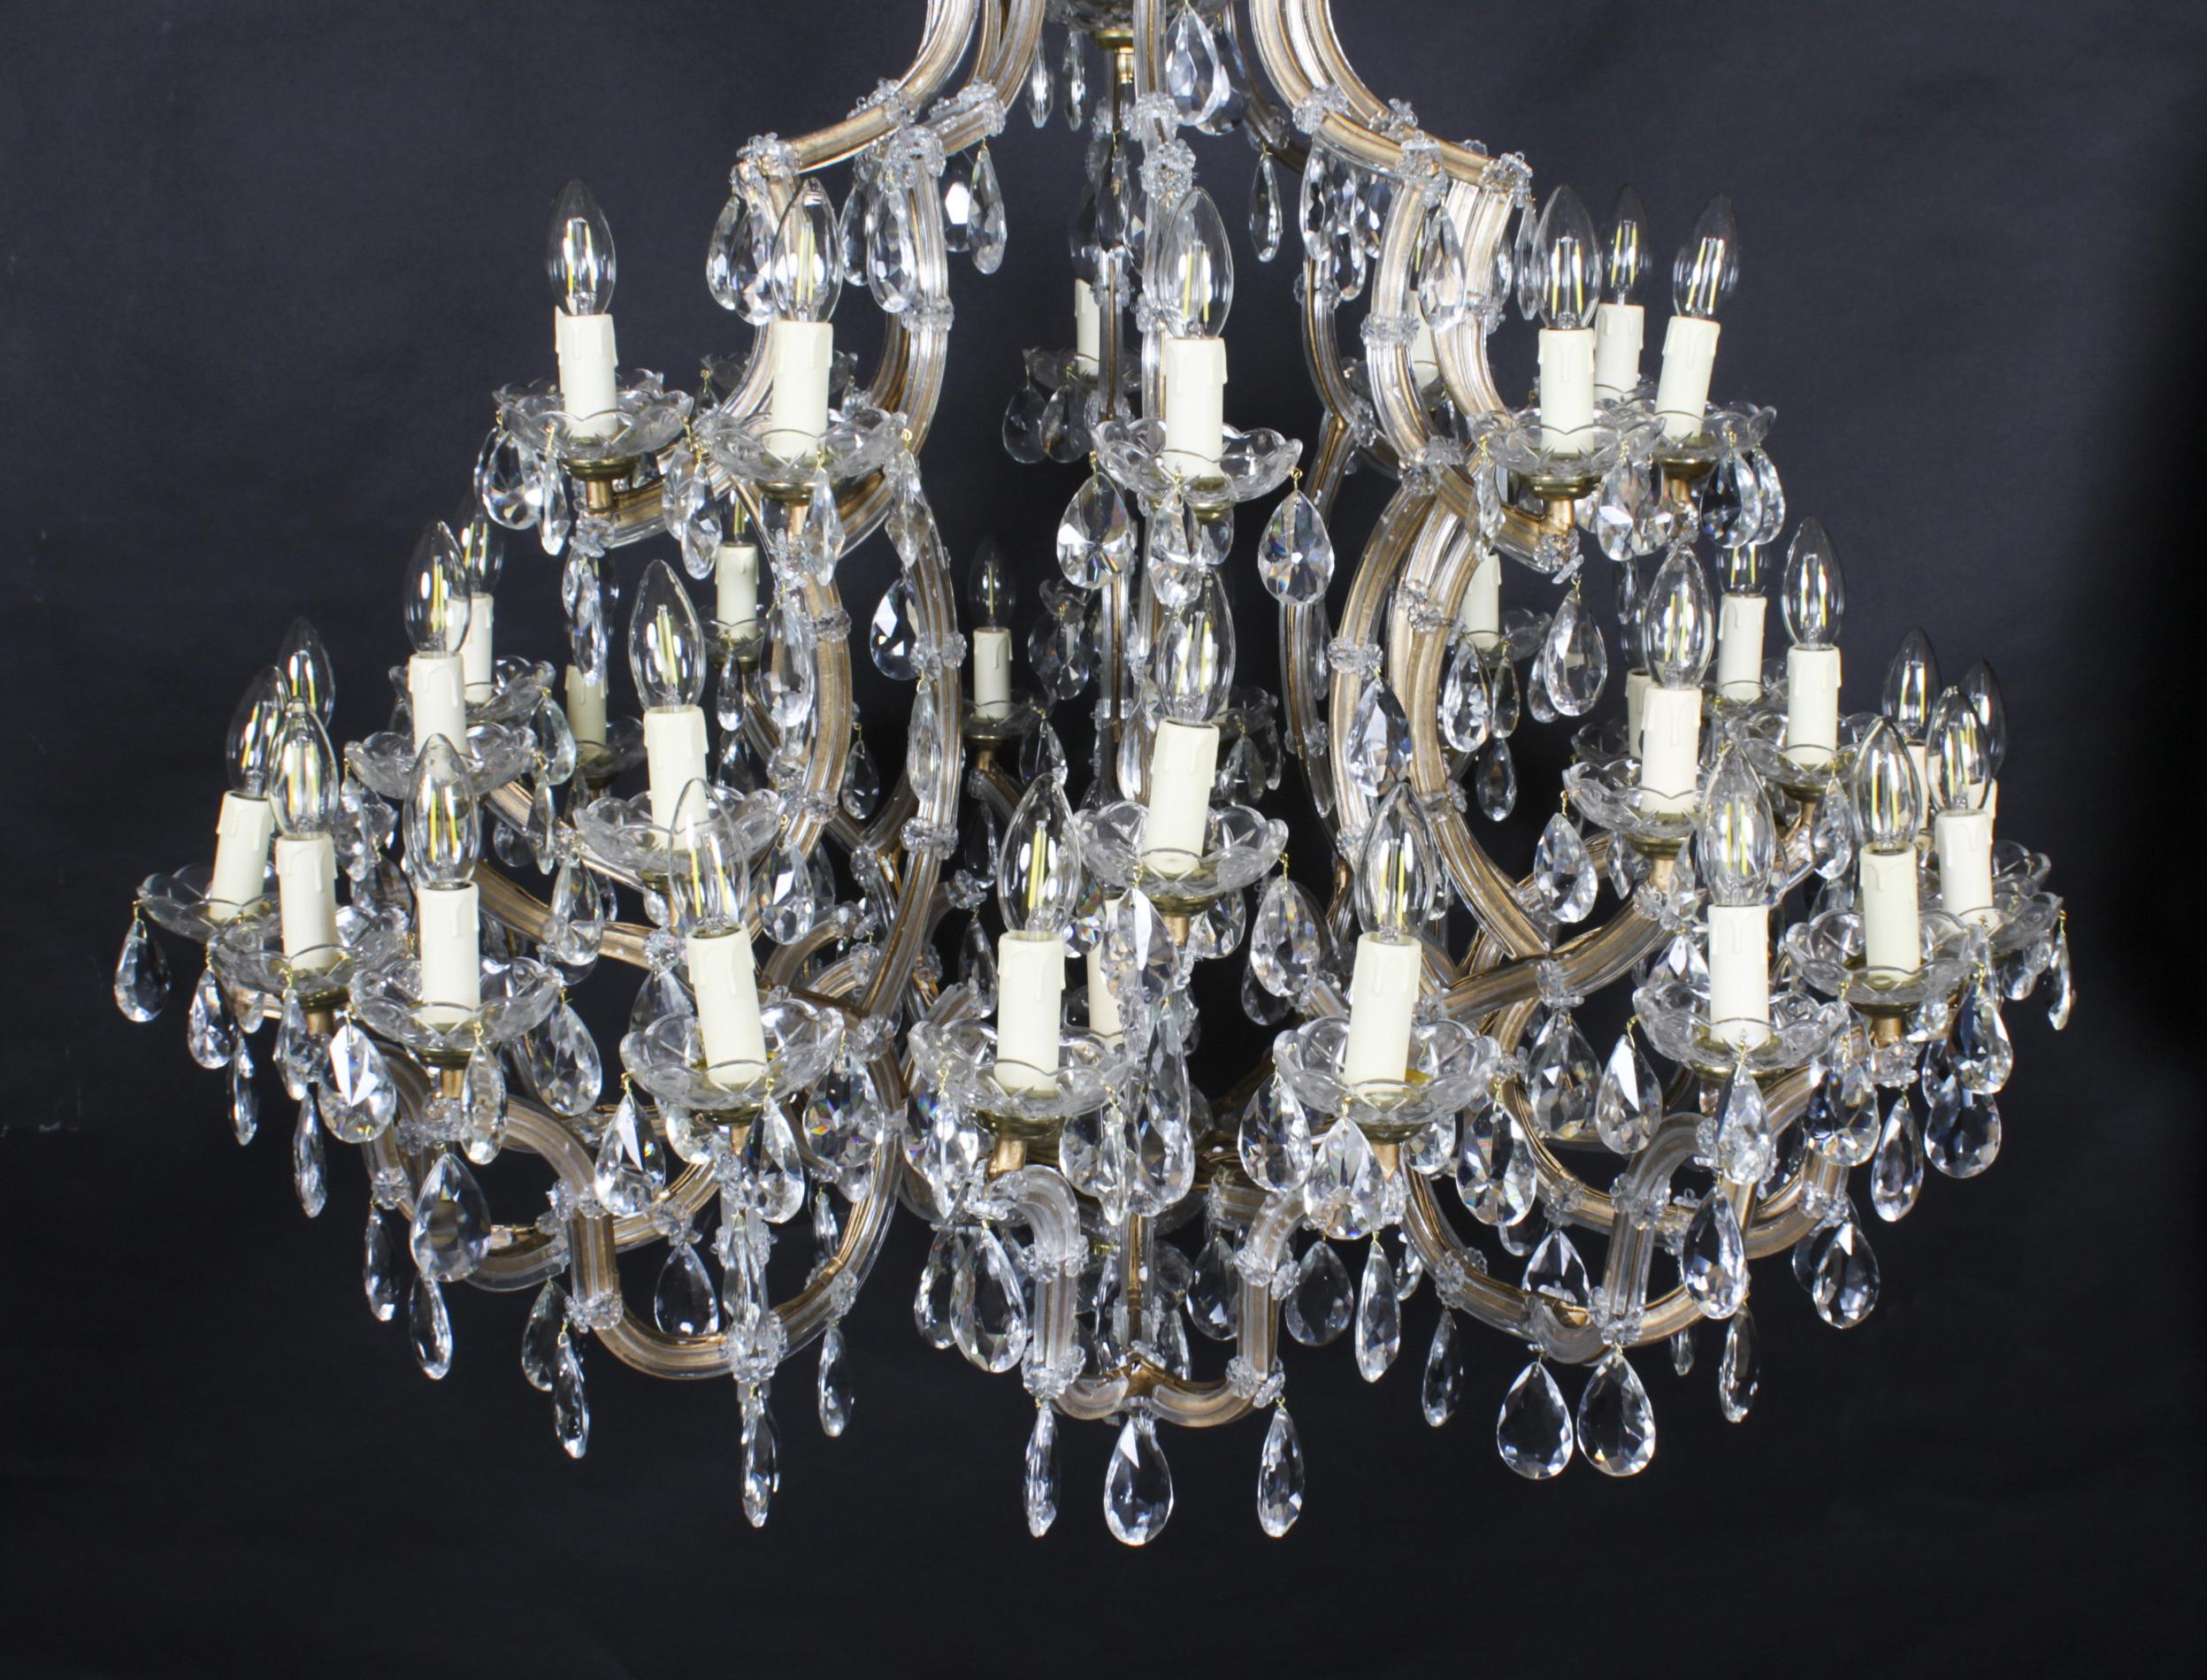 This is a beautiful English Ballroom crystal chandelier with forty-one lights arranged over in three tiers, circa 1920 in date.
 
This magnificent chandelier has exceptional crystal covered casting with an abundance of exquisite large crystal